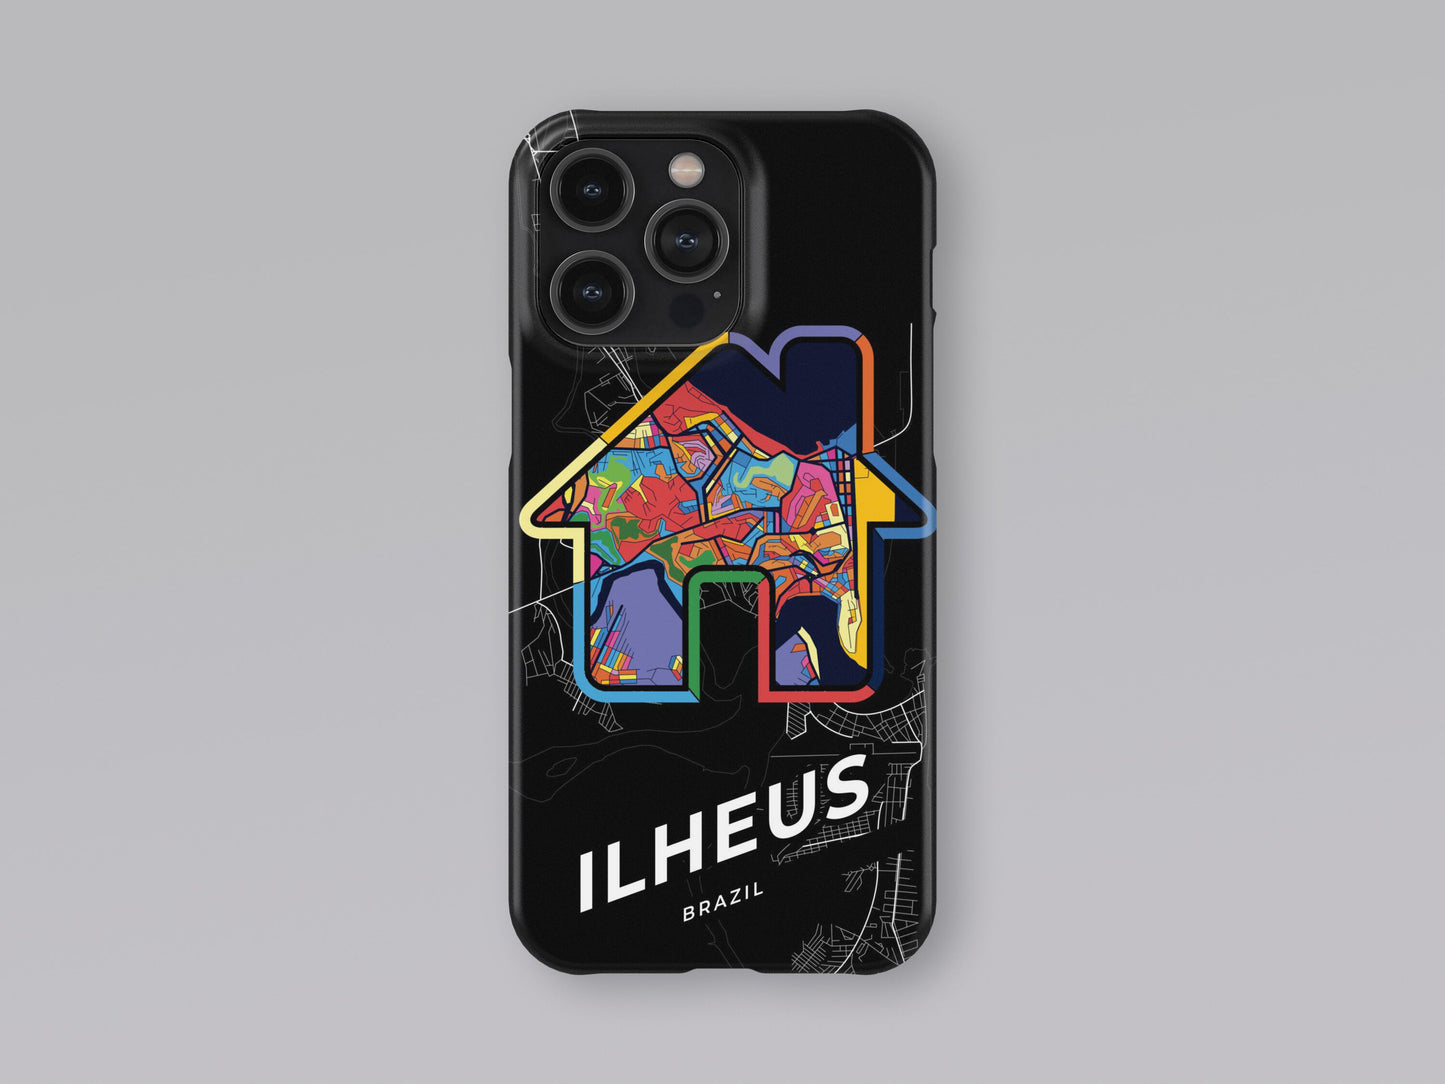 Ilheus Brazil slim phone case with colorful icon. Birthday, wedding or housewarming gift. Couple match cases. 3